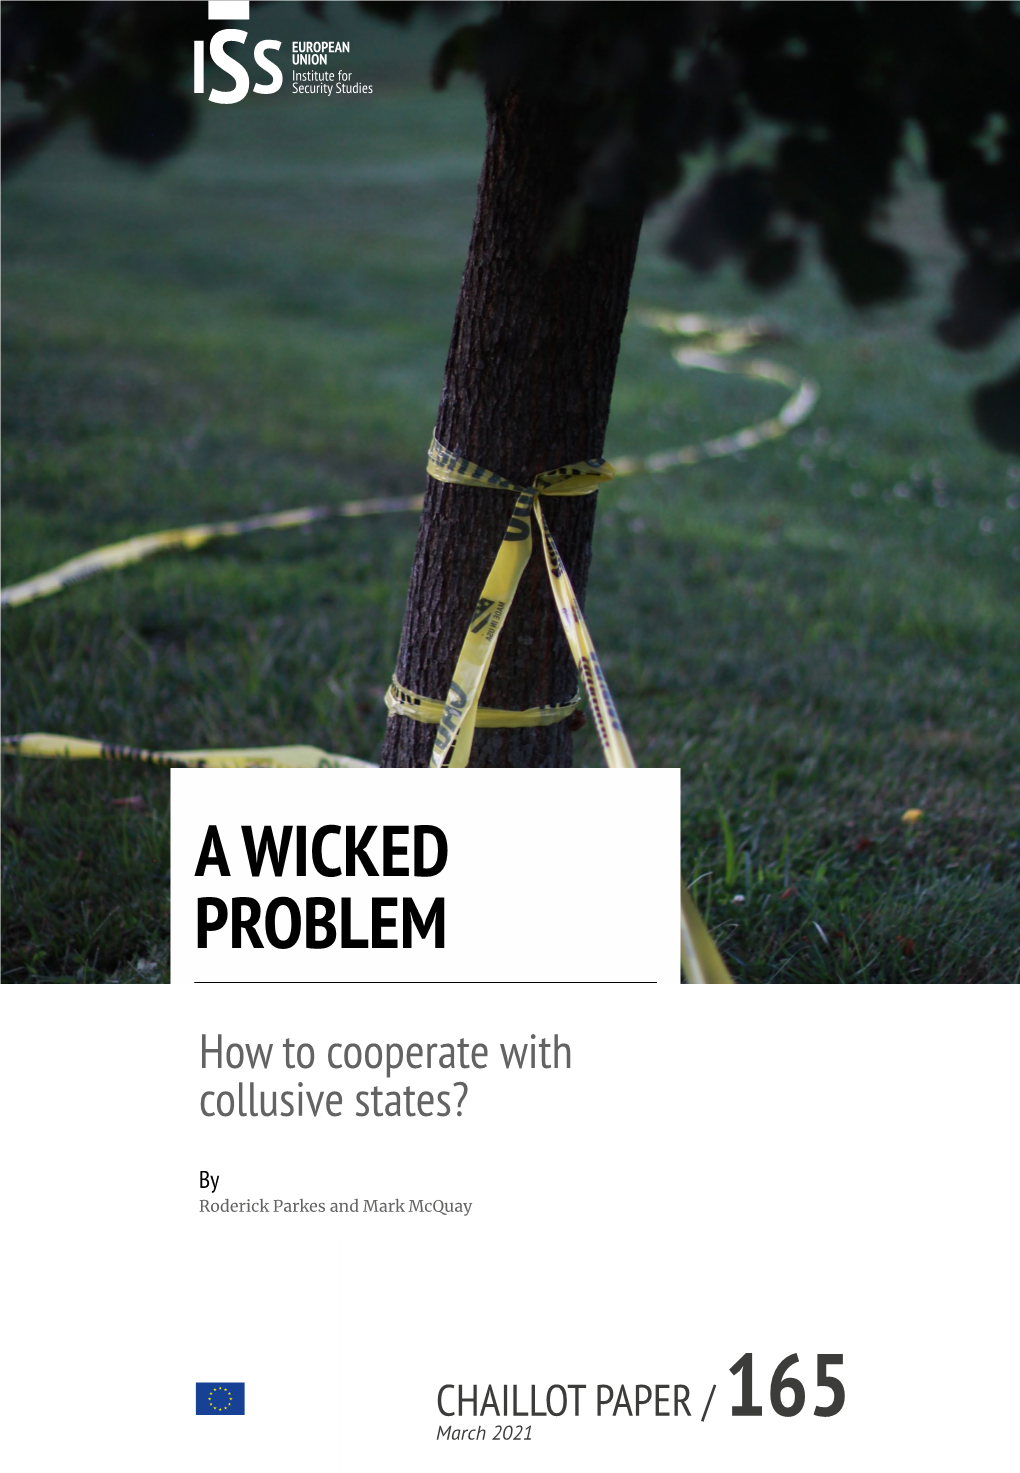 A WICKED PROBLEM | HOW to COOPERATE with COLLUSIVE STATES? European Union Institute for Security Studies (EUISS)